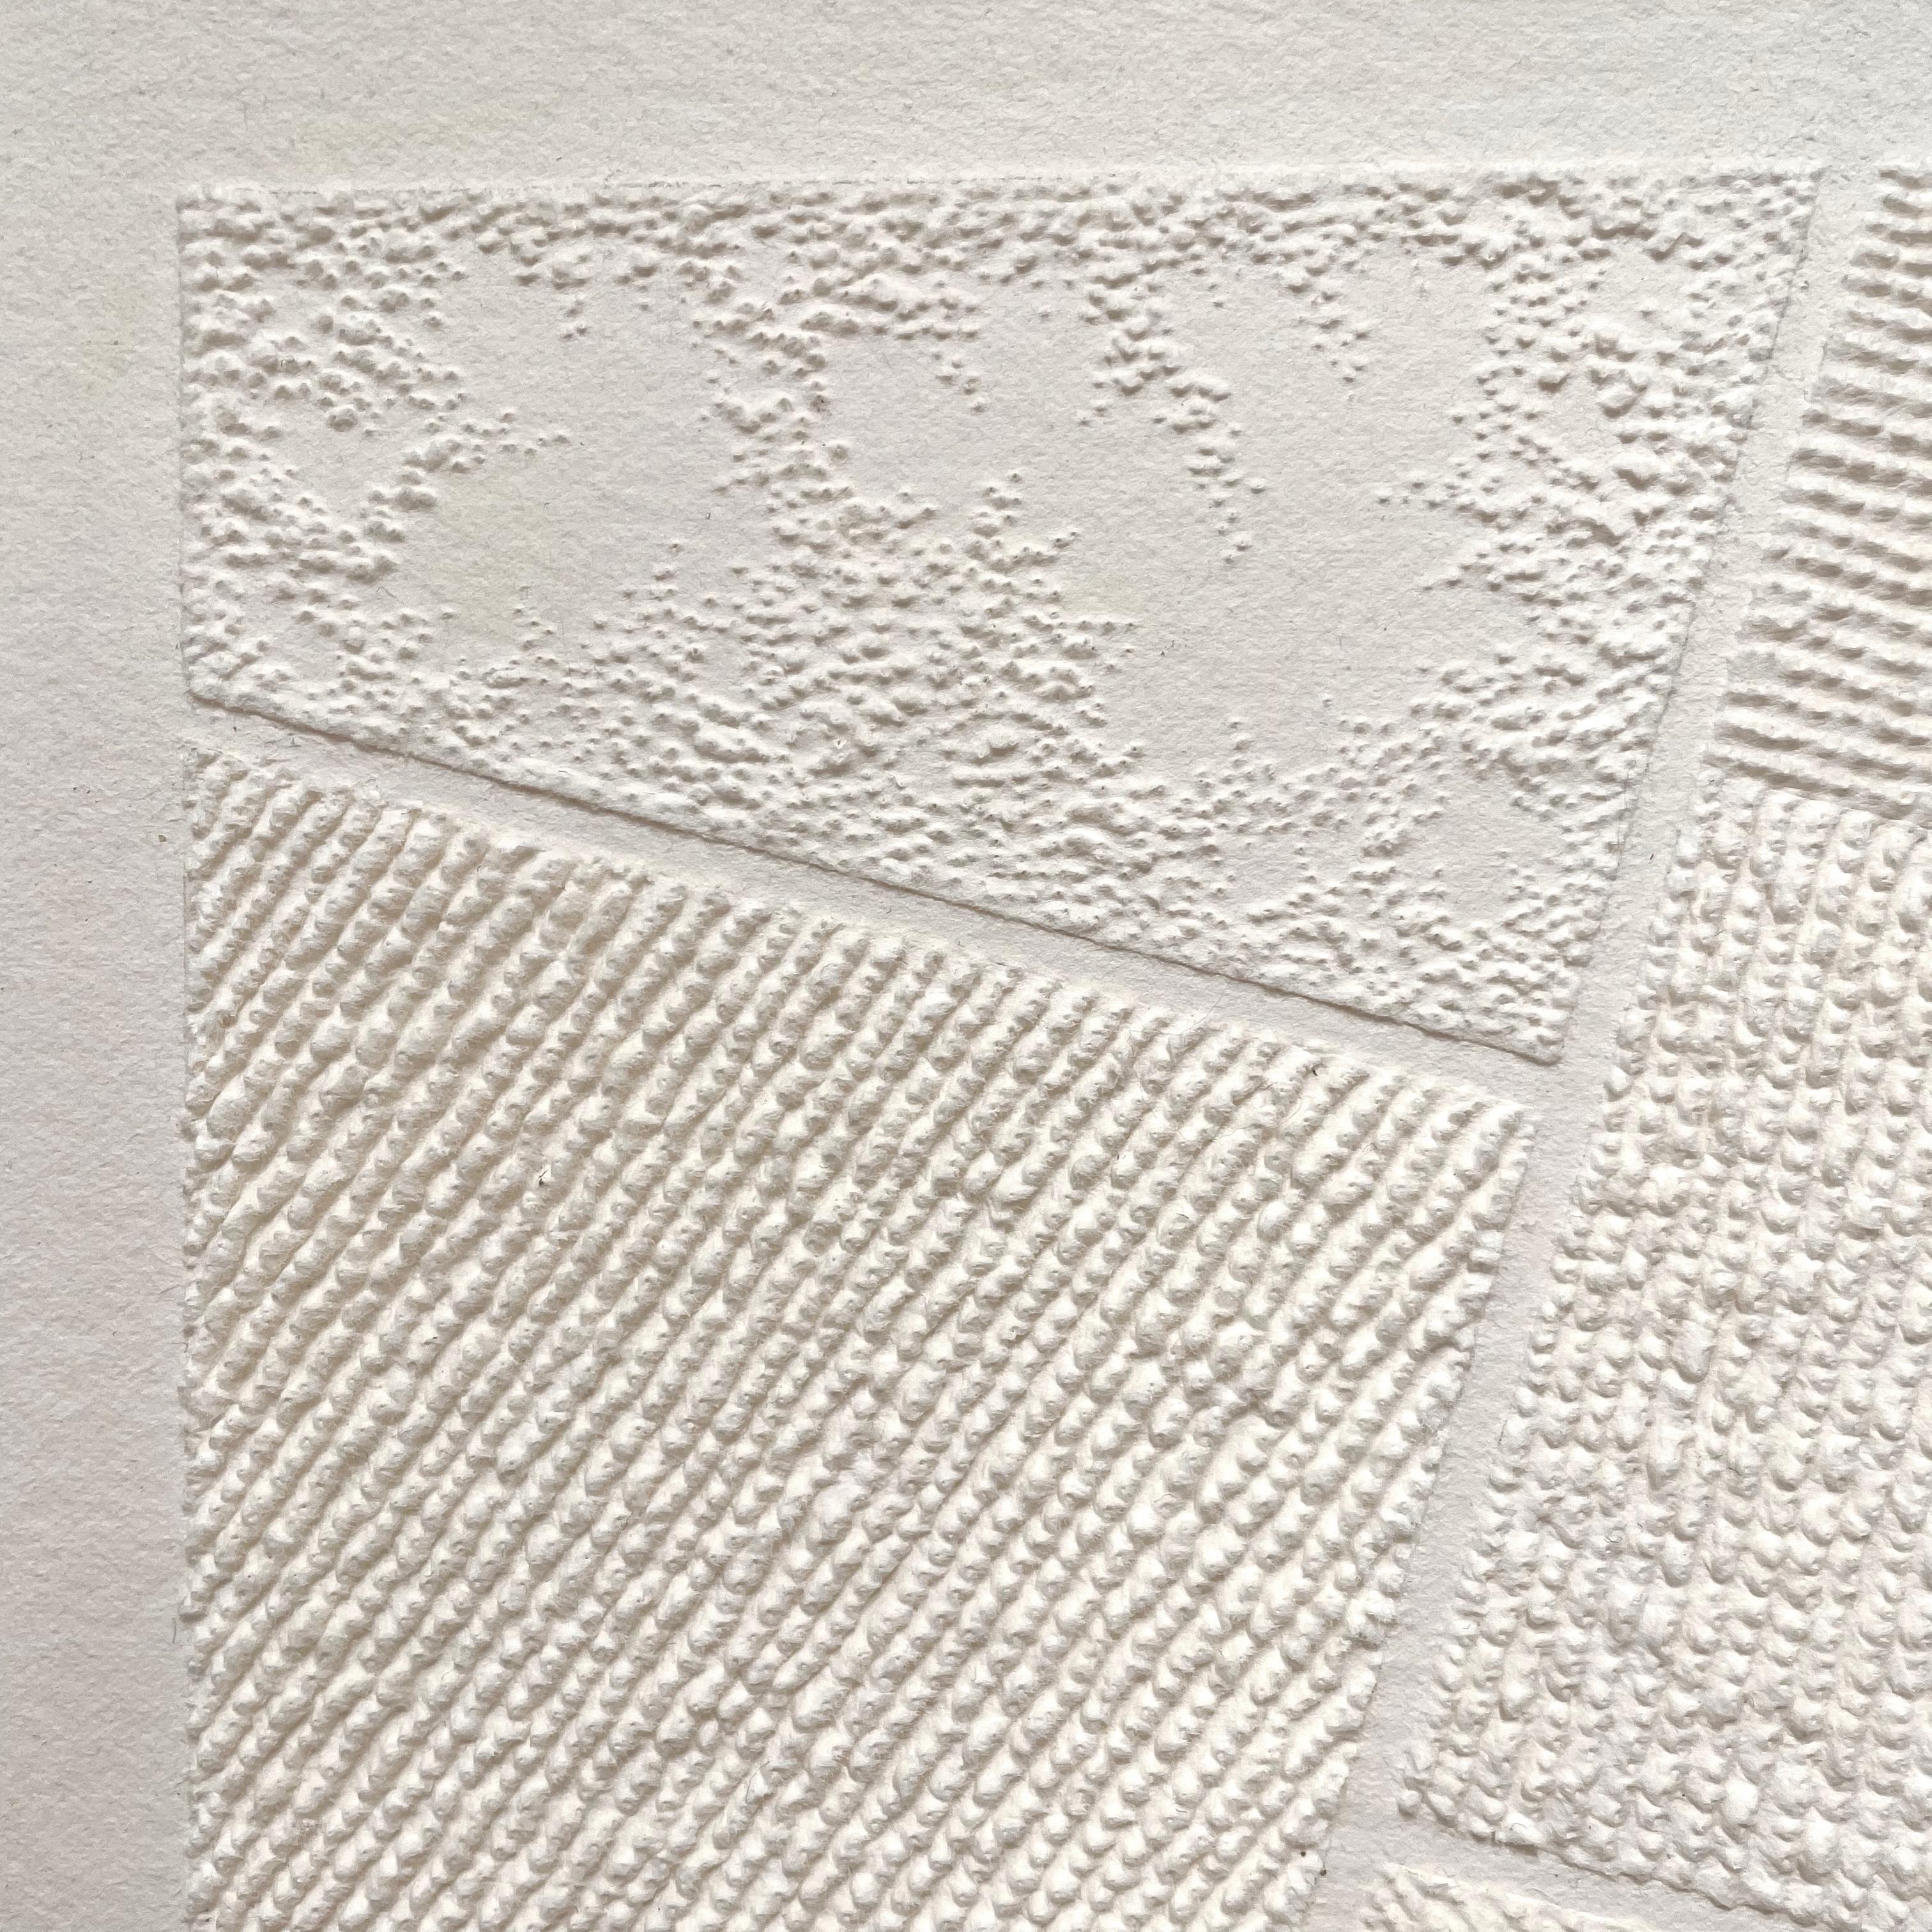 T #8- intricate beige 3D abstract aerial landscape pulled paper fiber drawing - Art by Antonin Anzil